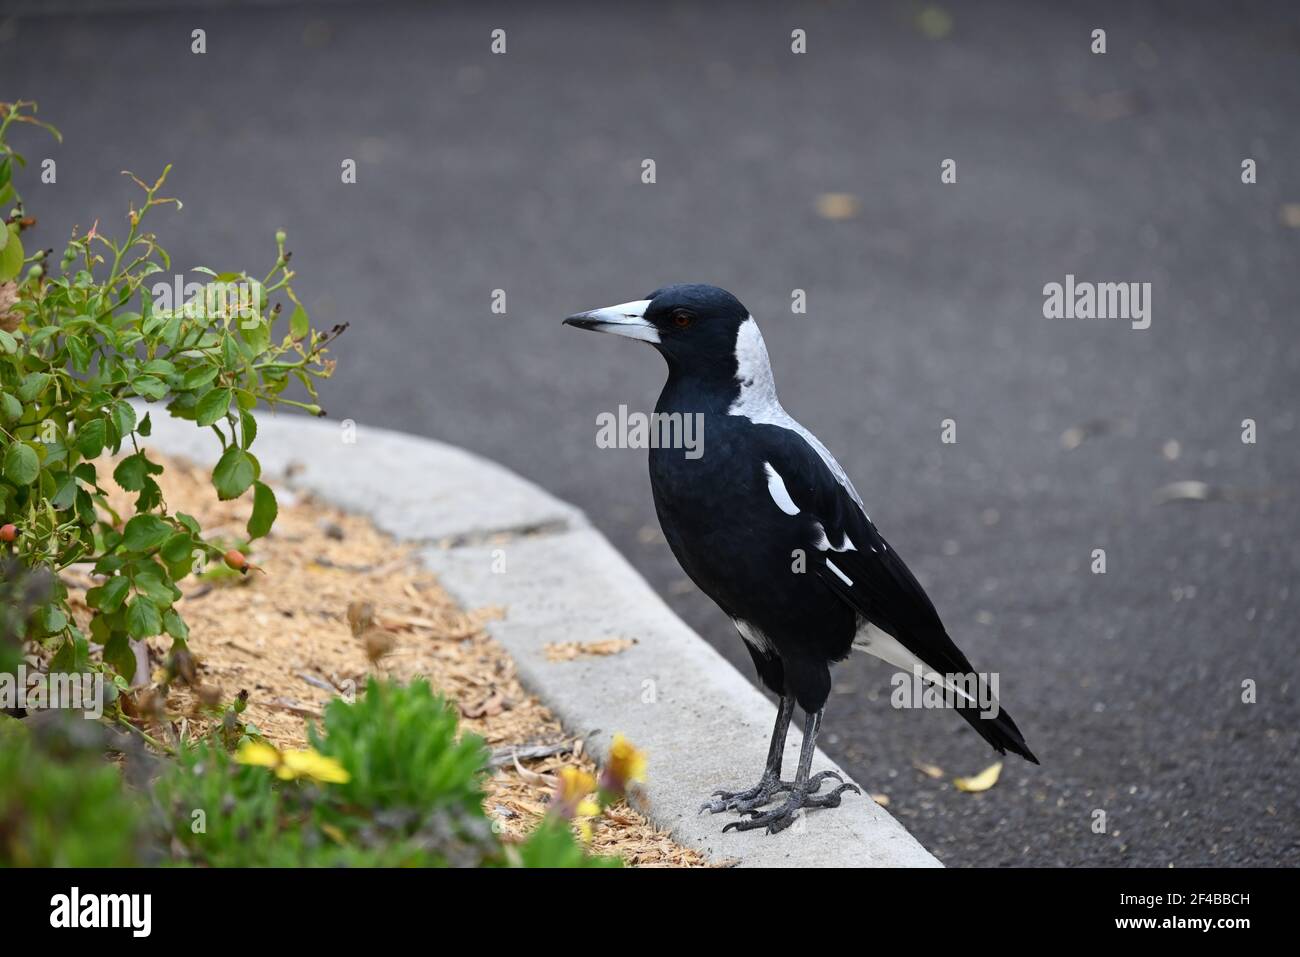 Australian Magpie perched next to a garden bed Stock Photo